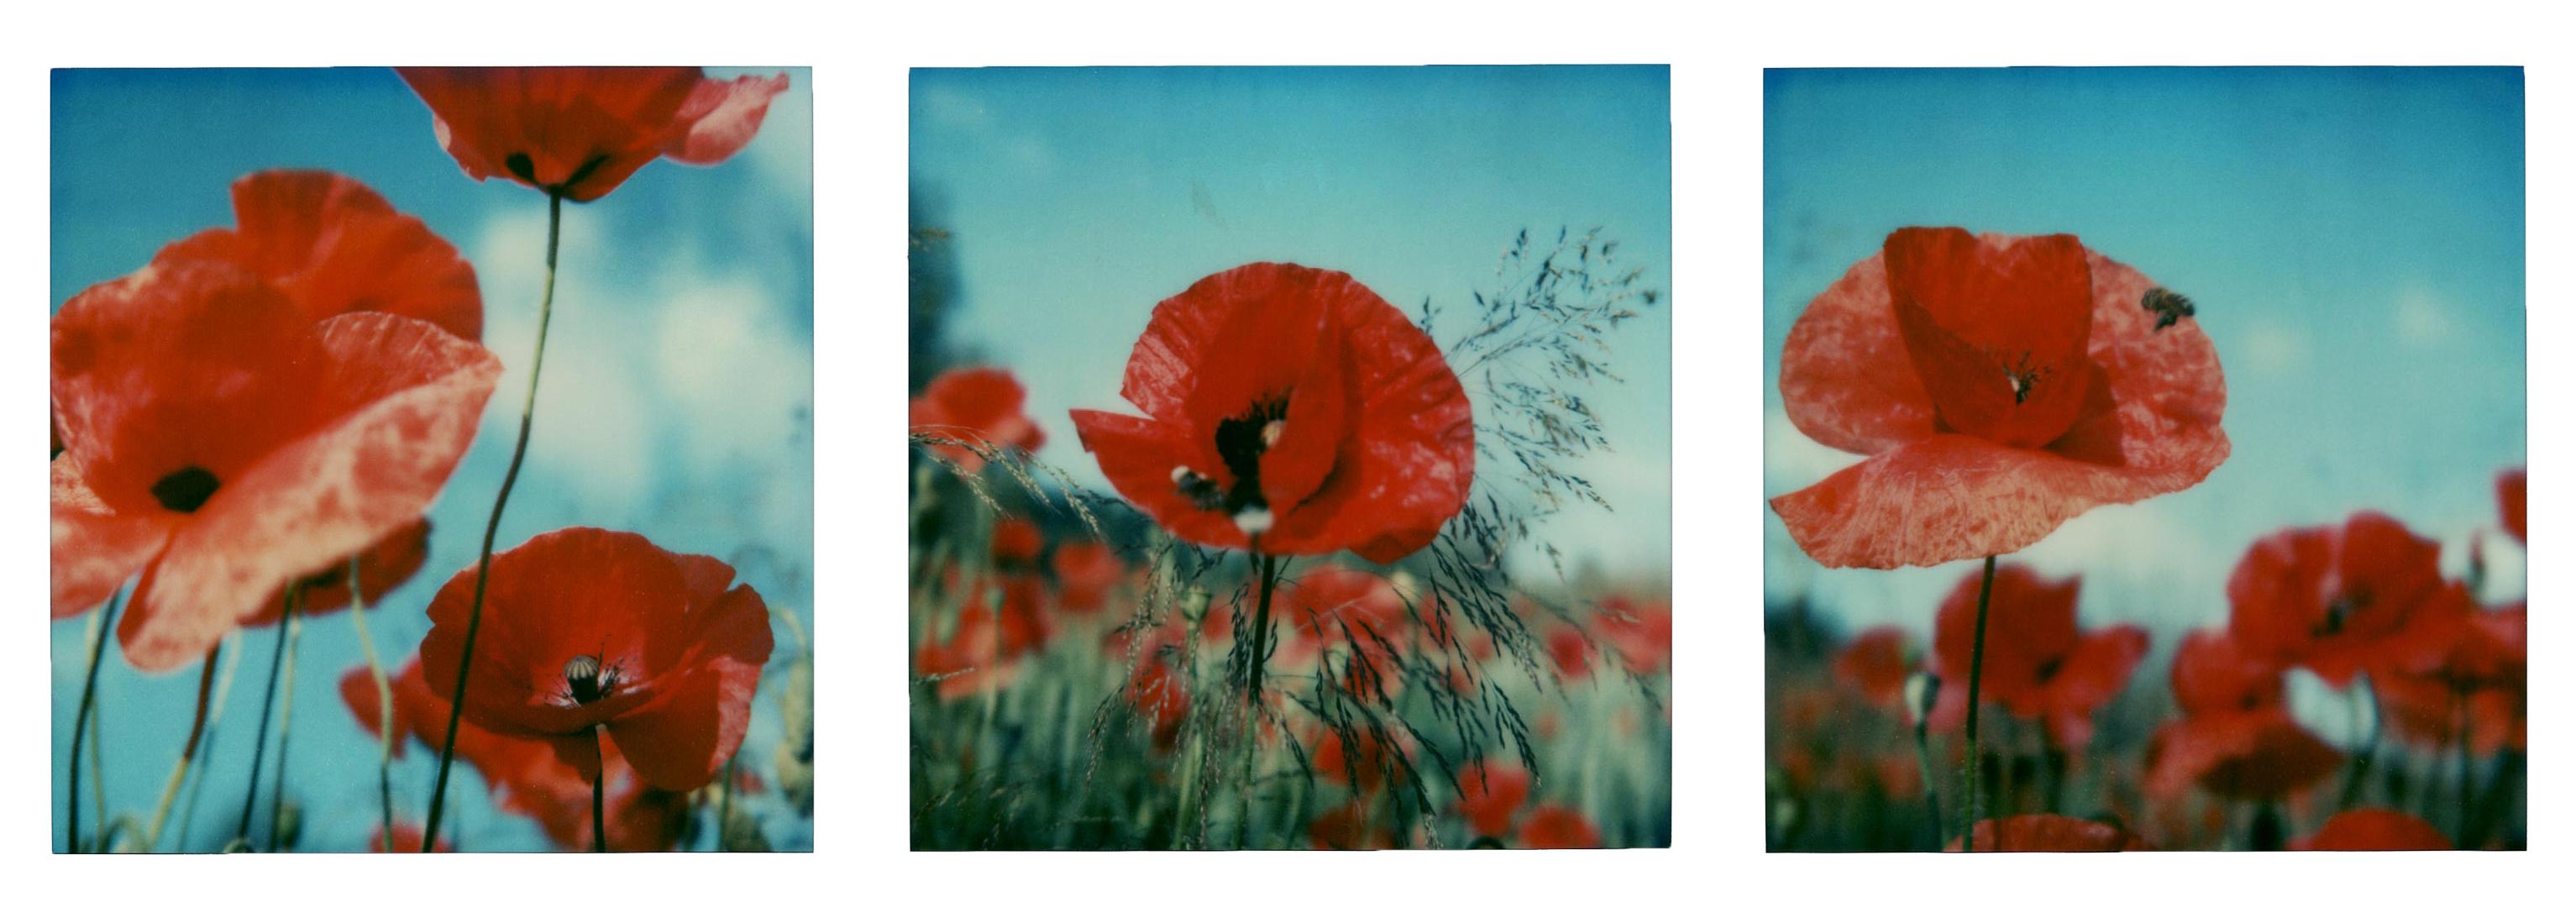 Poppy Realm #ROW [From the series Wild Things]